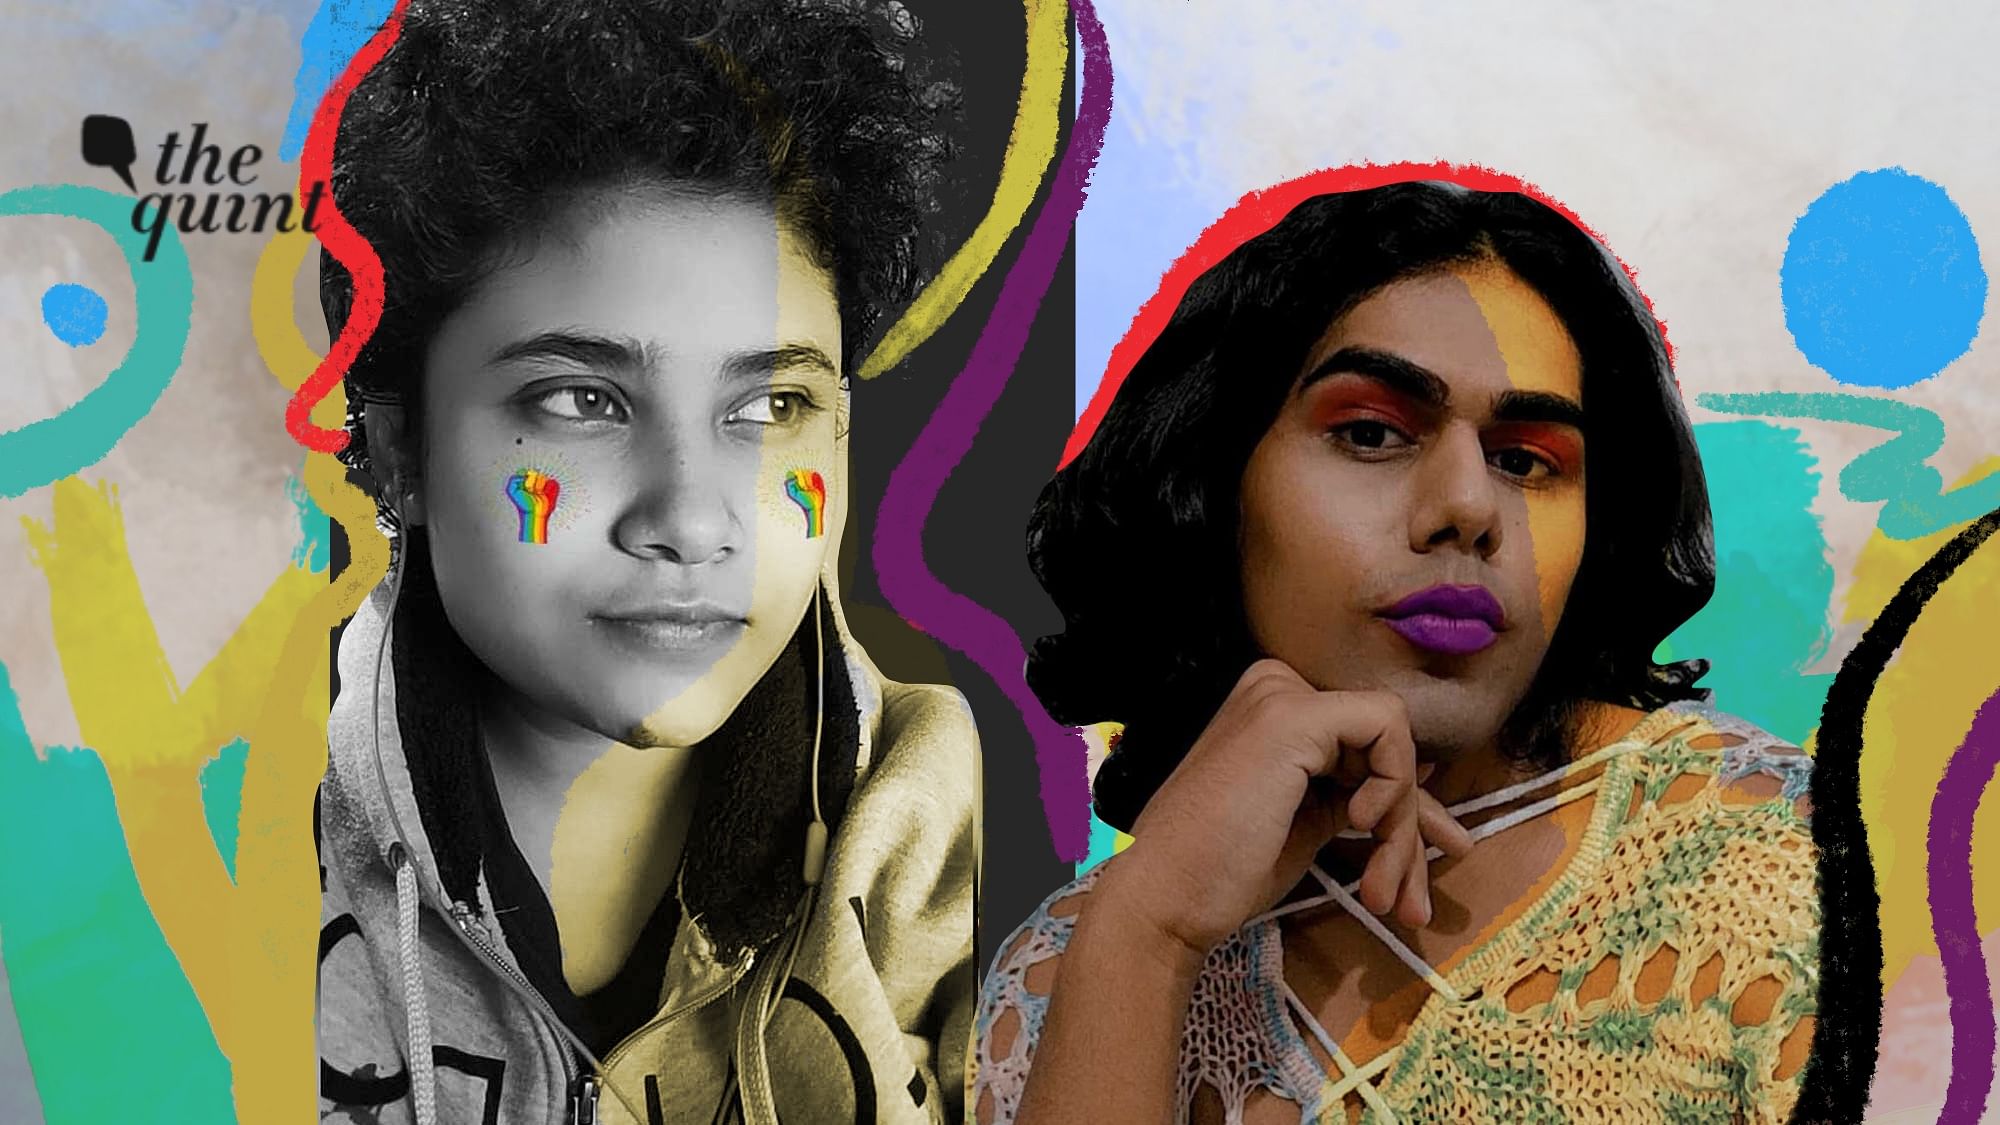 Being Dalit and Trans Siddharth Gope and Rishabh Raut Faced Transphobia And Casteist Slurs for Raising Funds for Gender Affirmation Surgery picture